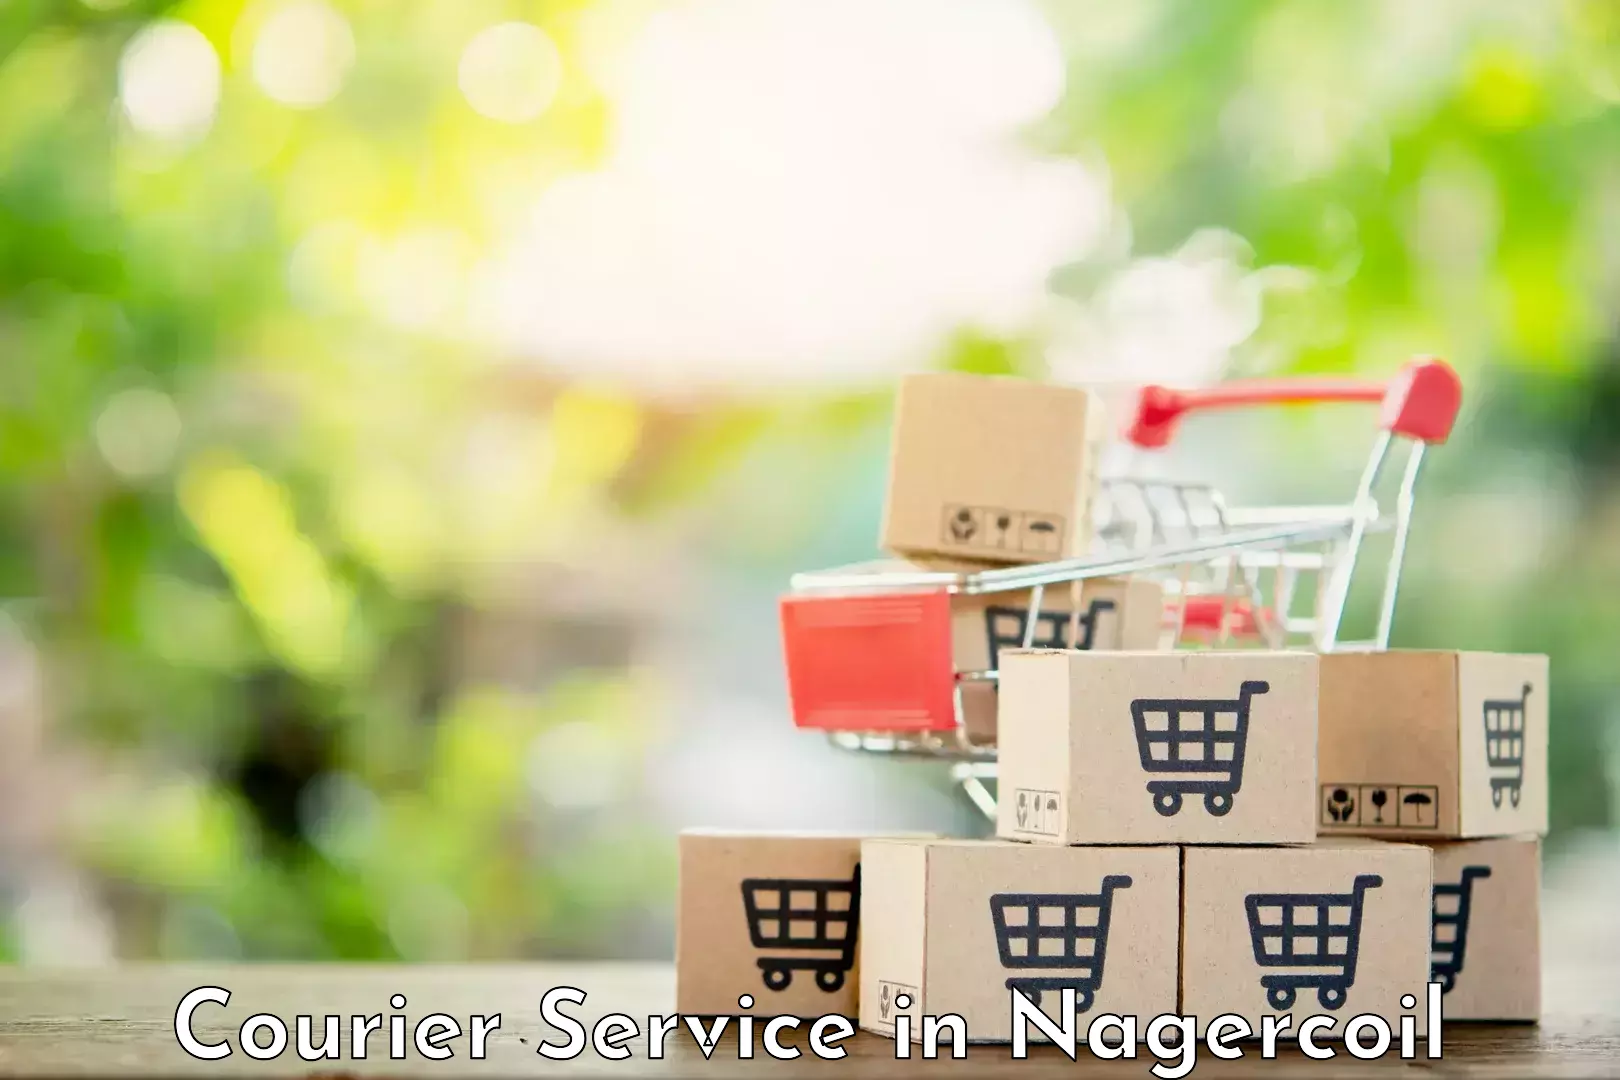 Multi-service courier options in Nagercoil